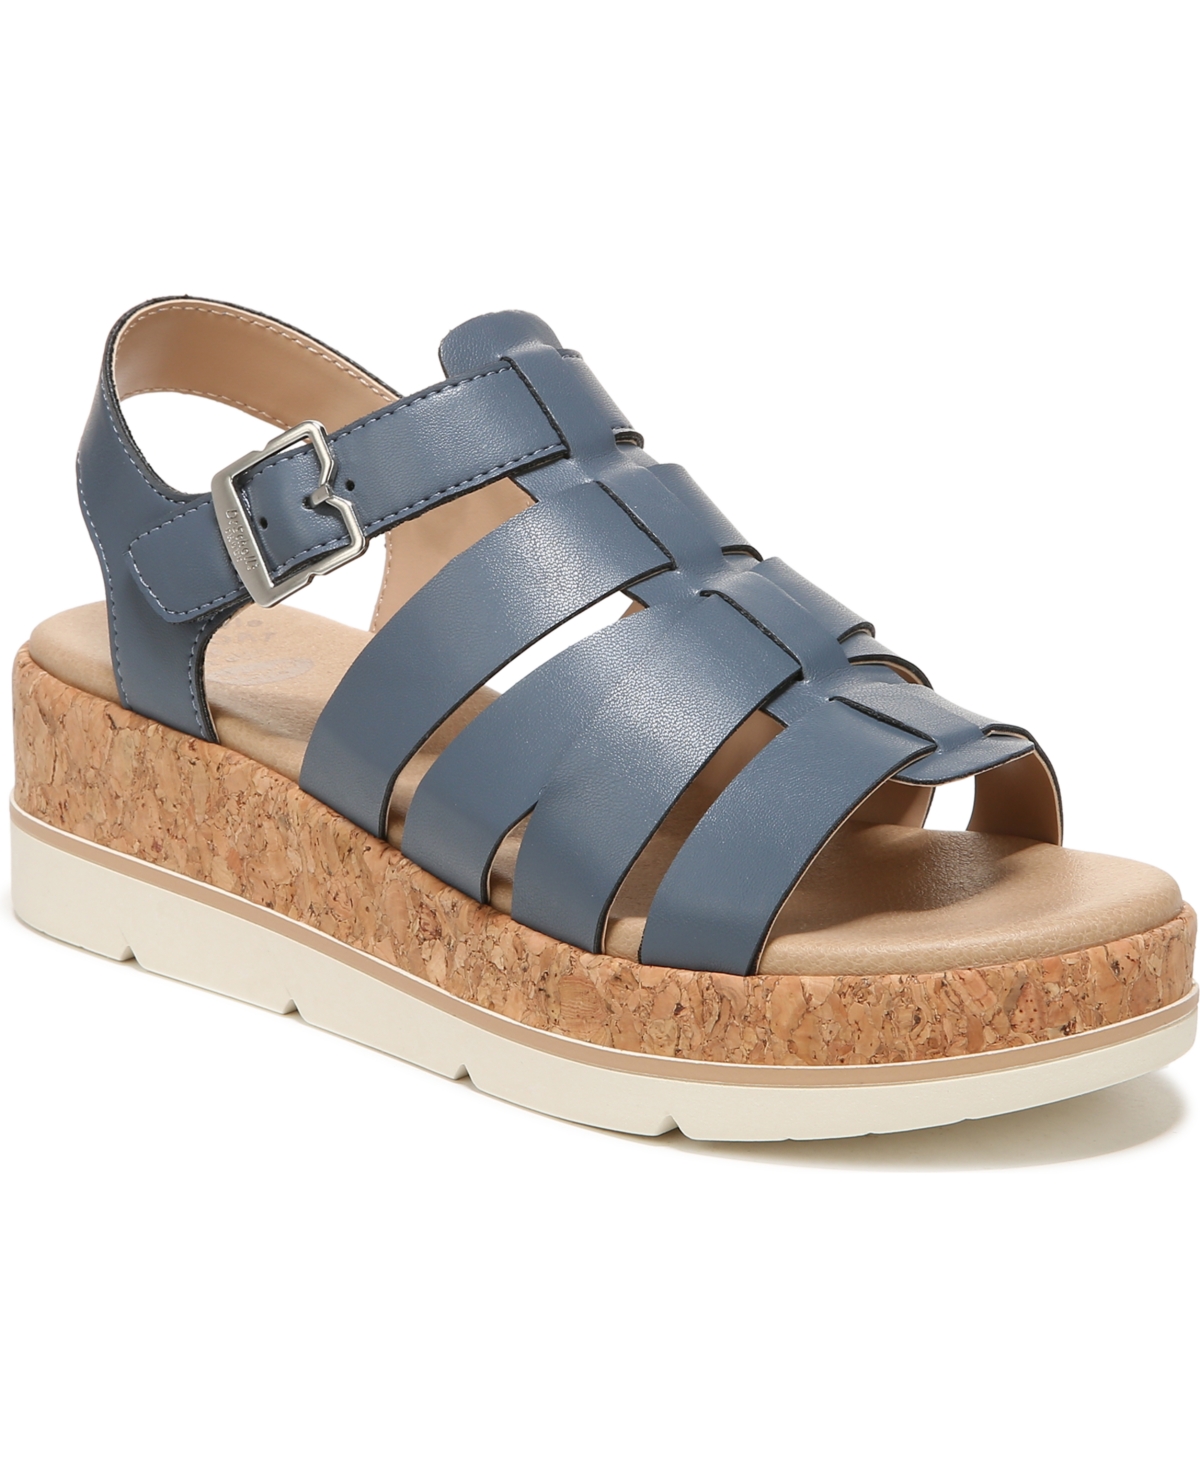 Women's Only You Fisherman Sandals - Oxide Blue Faux Leather